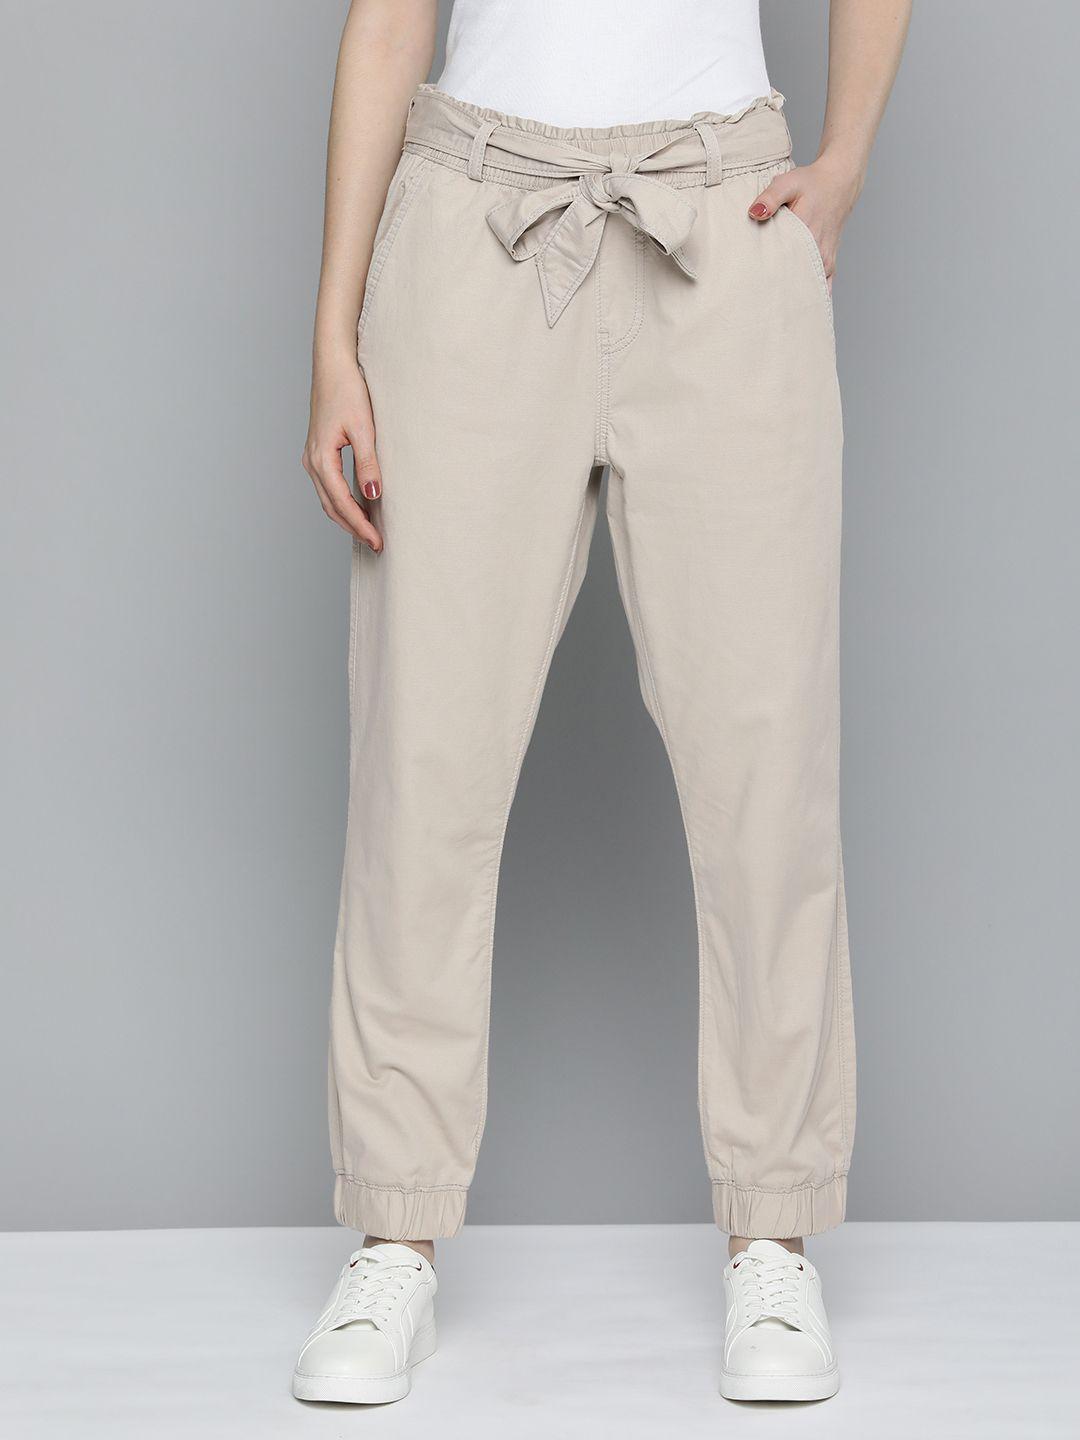 levis-women-high-rise-joggers-trousers-comes-with-a-fabric-belt